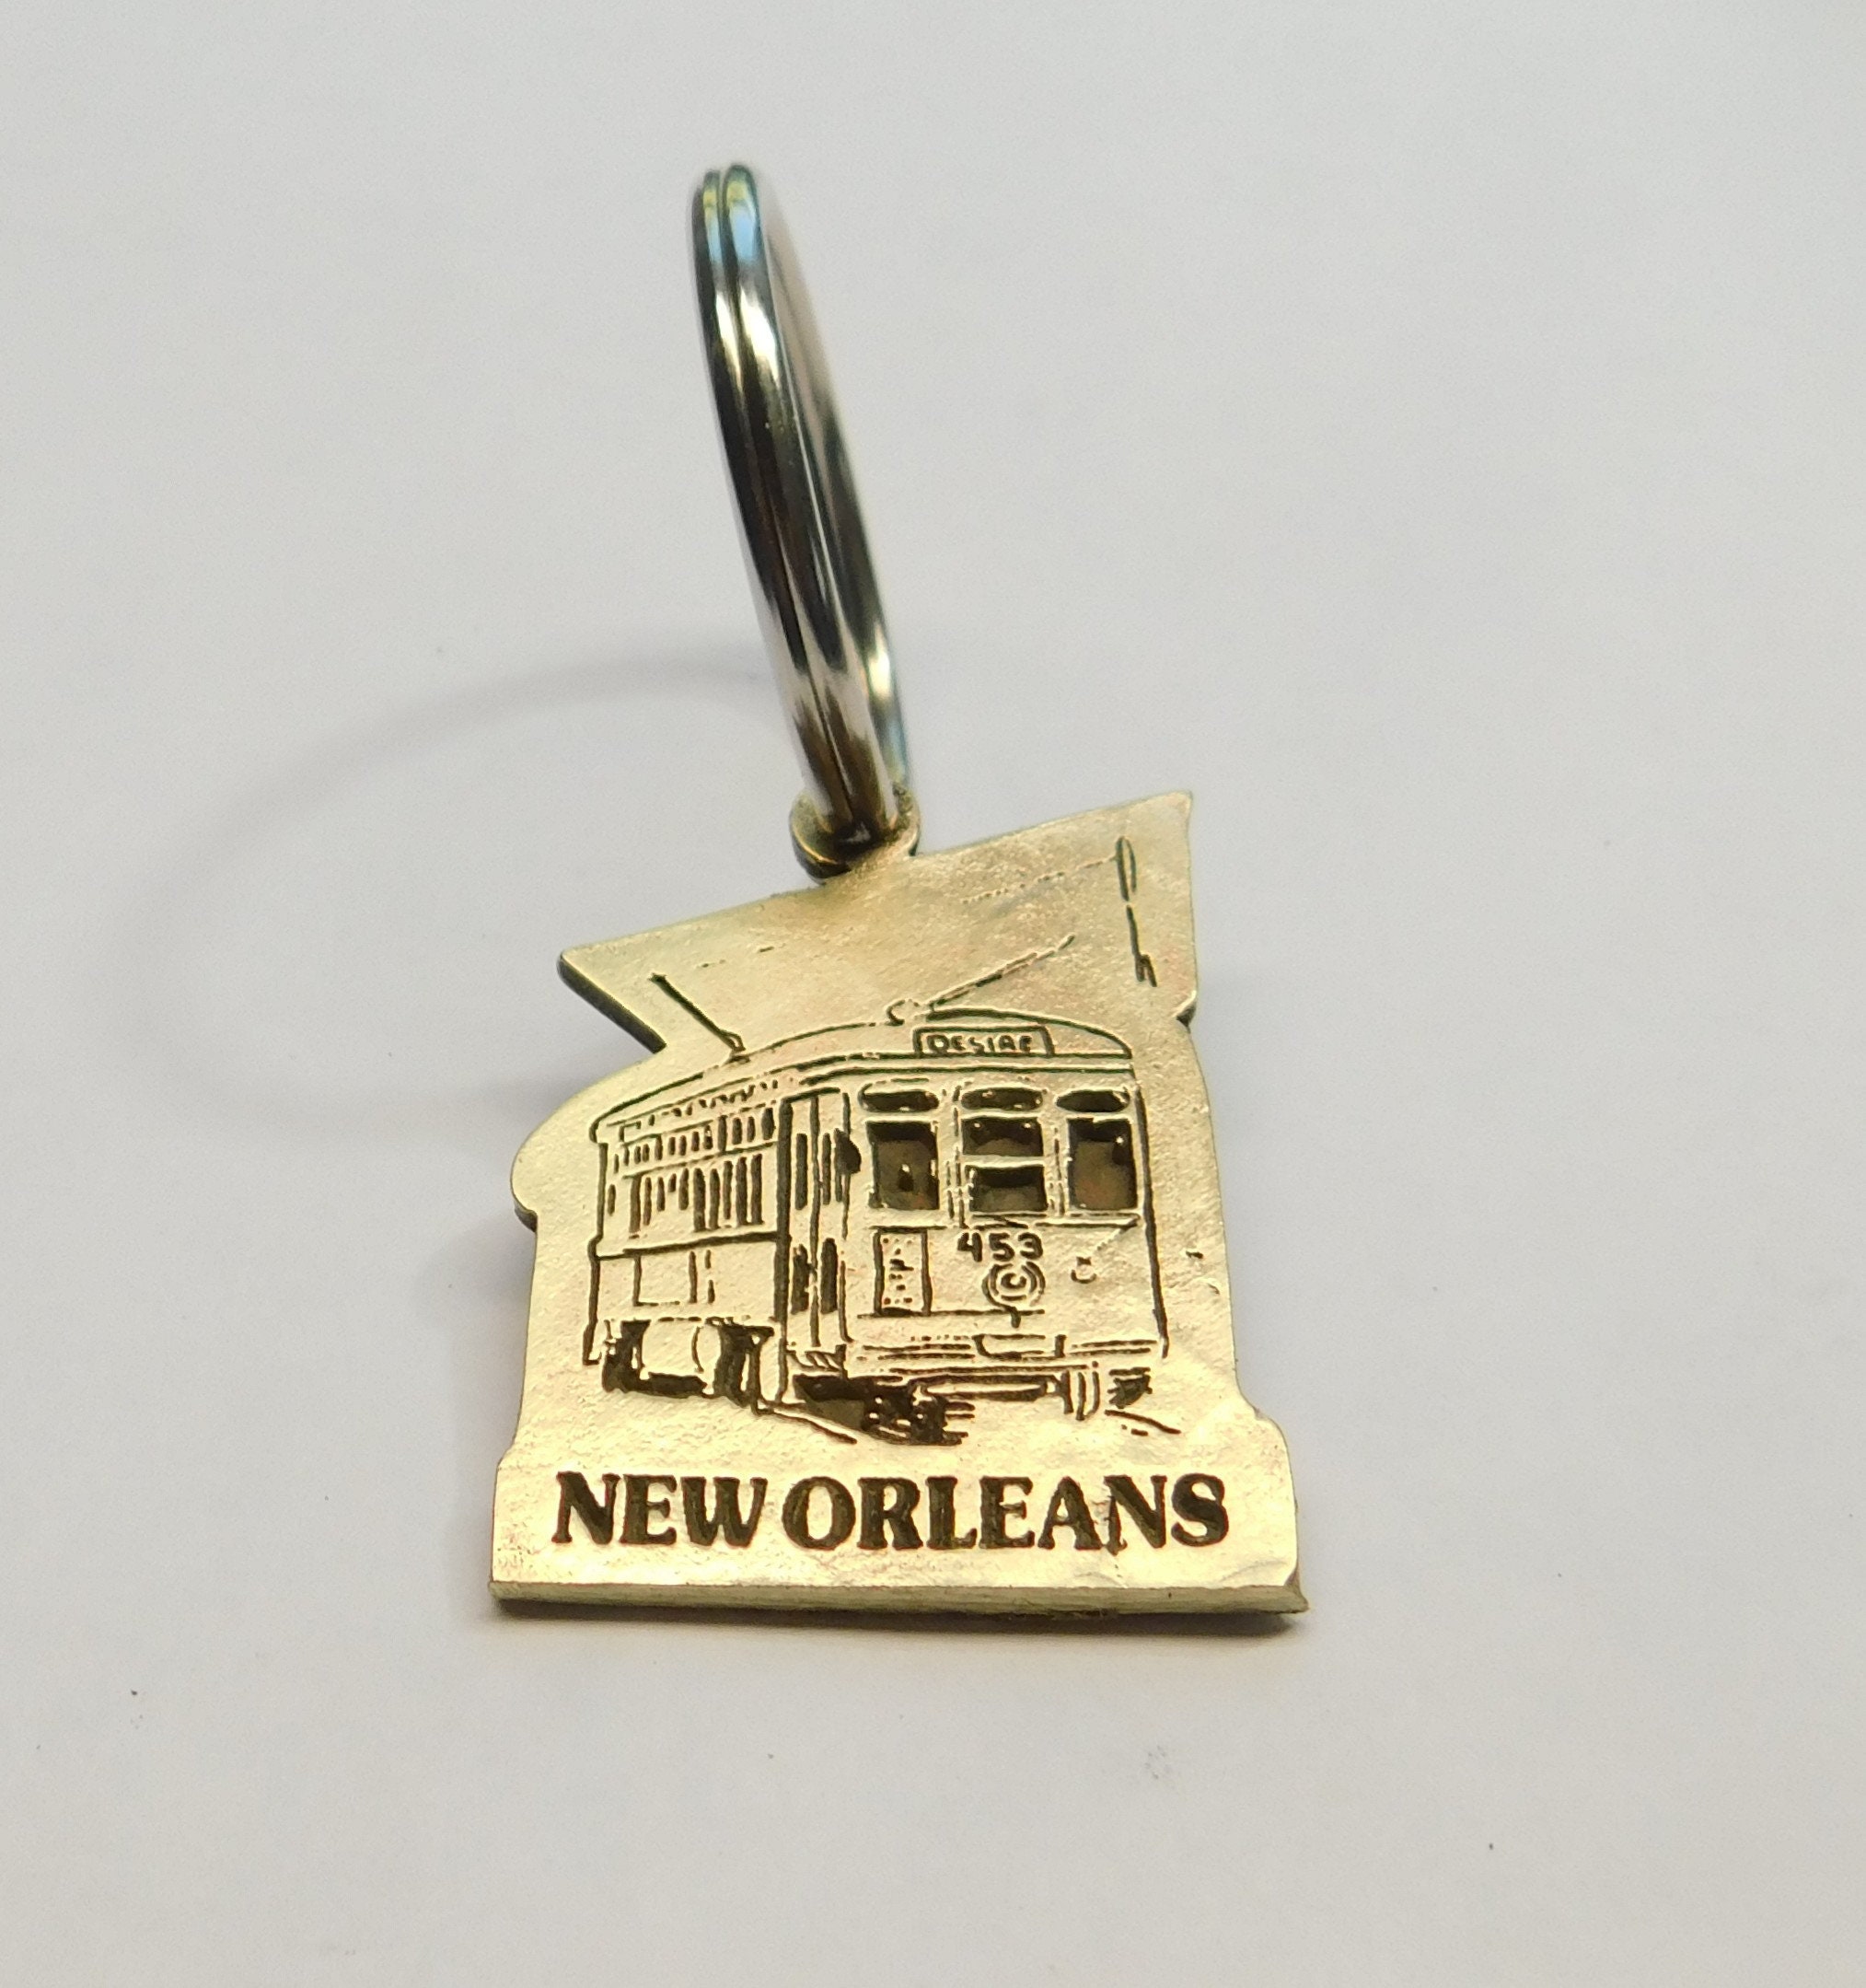 New Orleans Keychain image